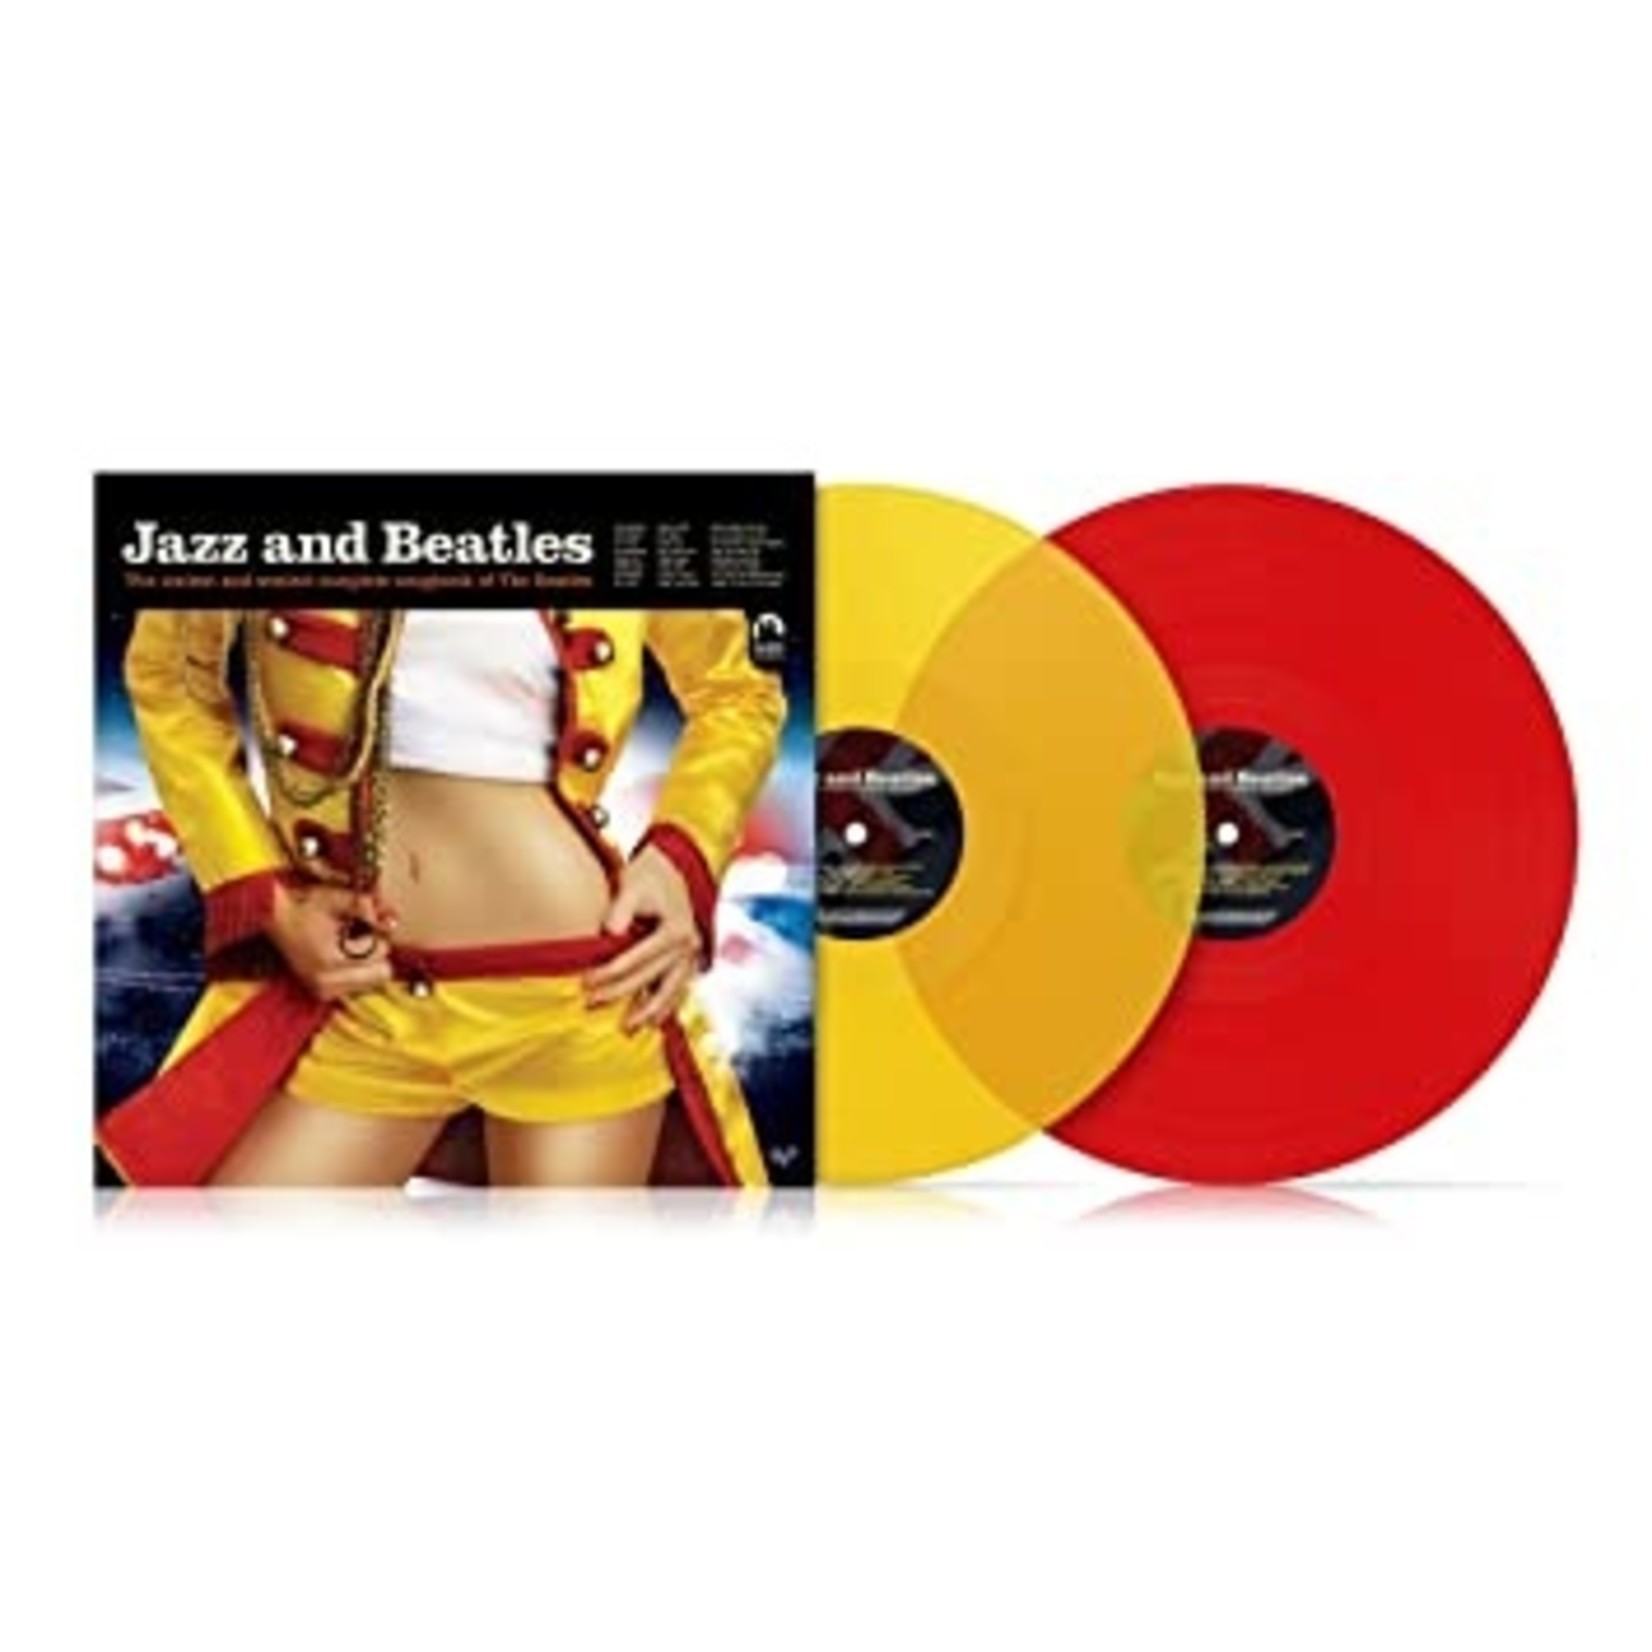 JAZZ AND BEATLES  2X LP (COLORED)